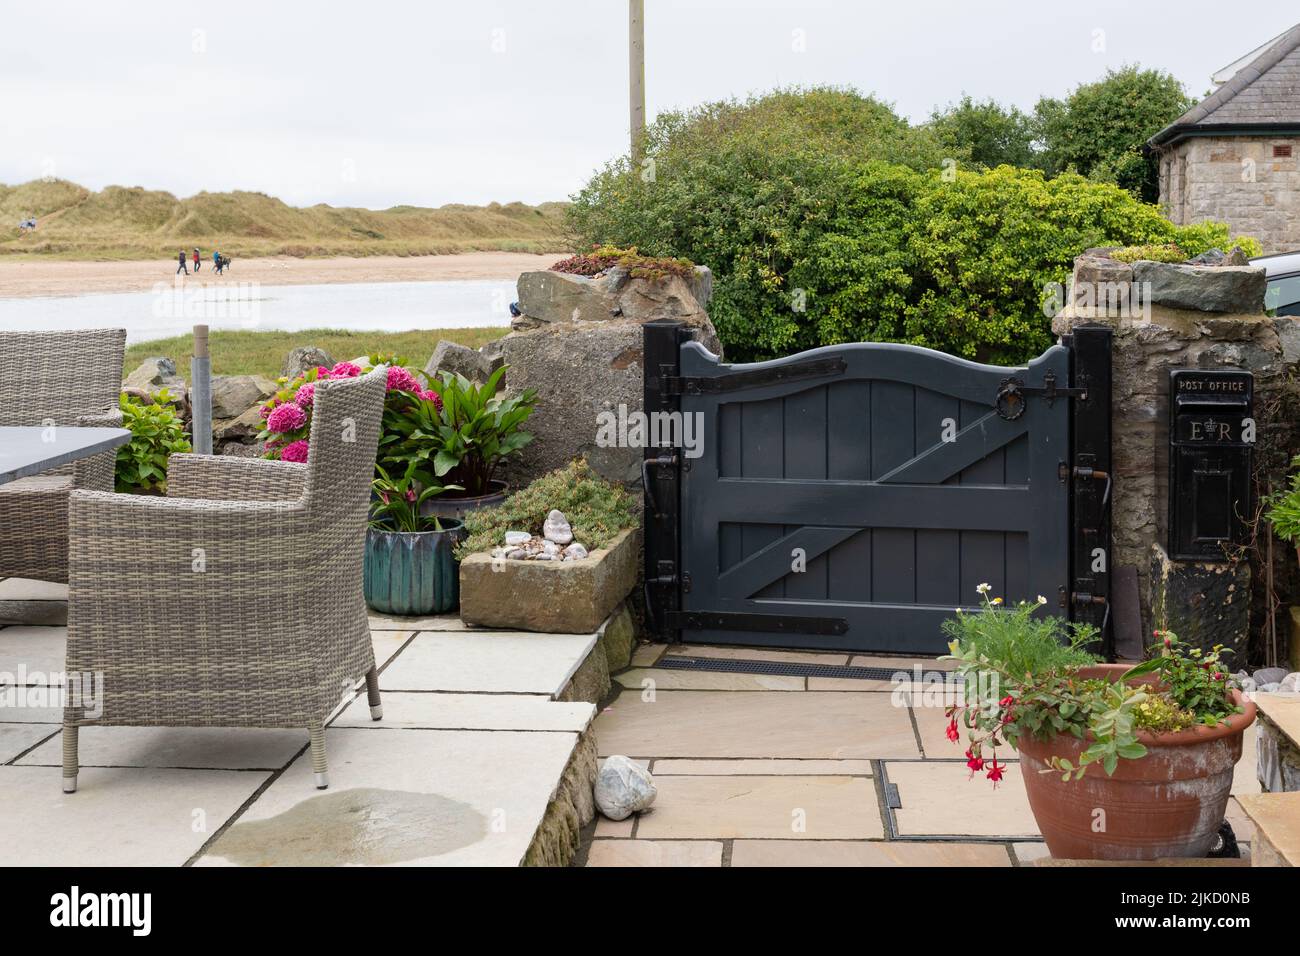 Household flood protection - attractive wooden flood gate barrier protecting garden and property by side of estuary from flooding - UK Stock Photo